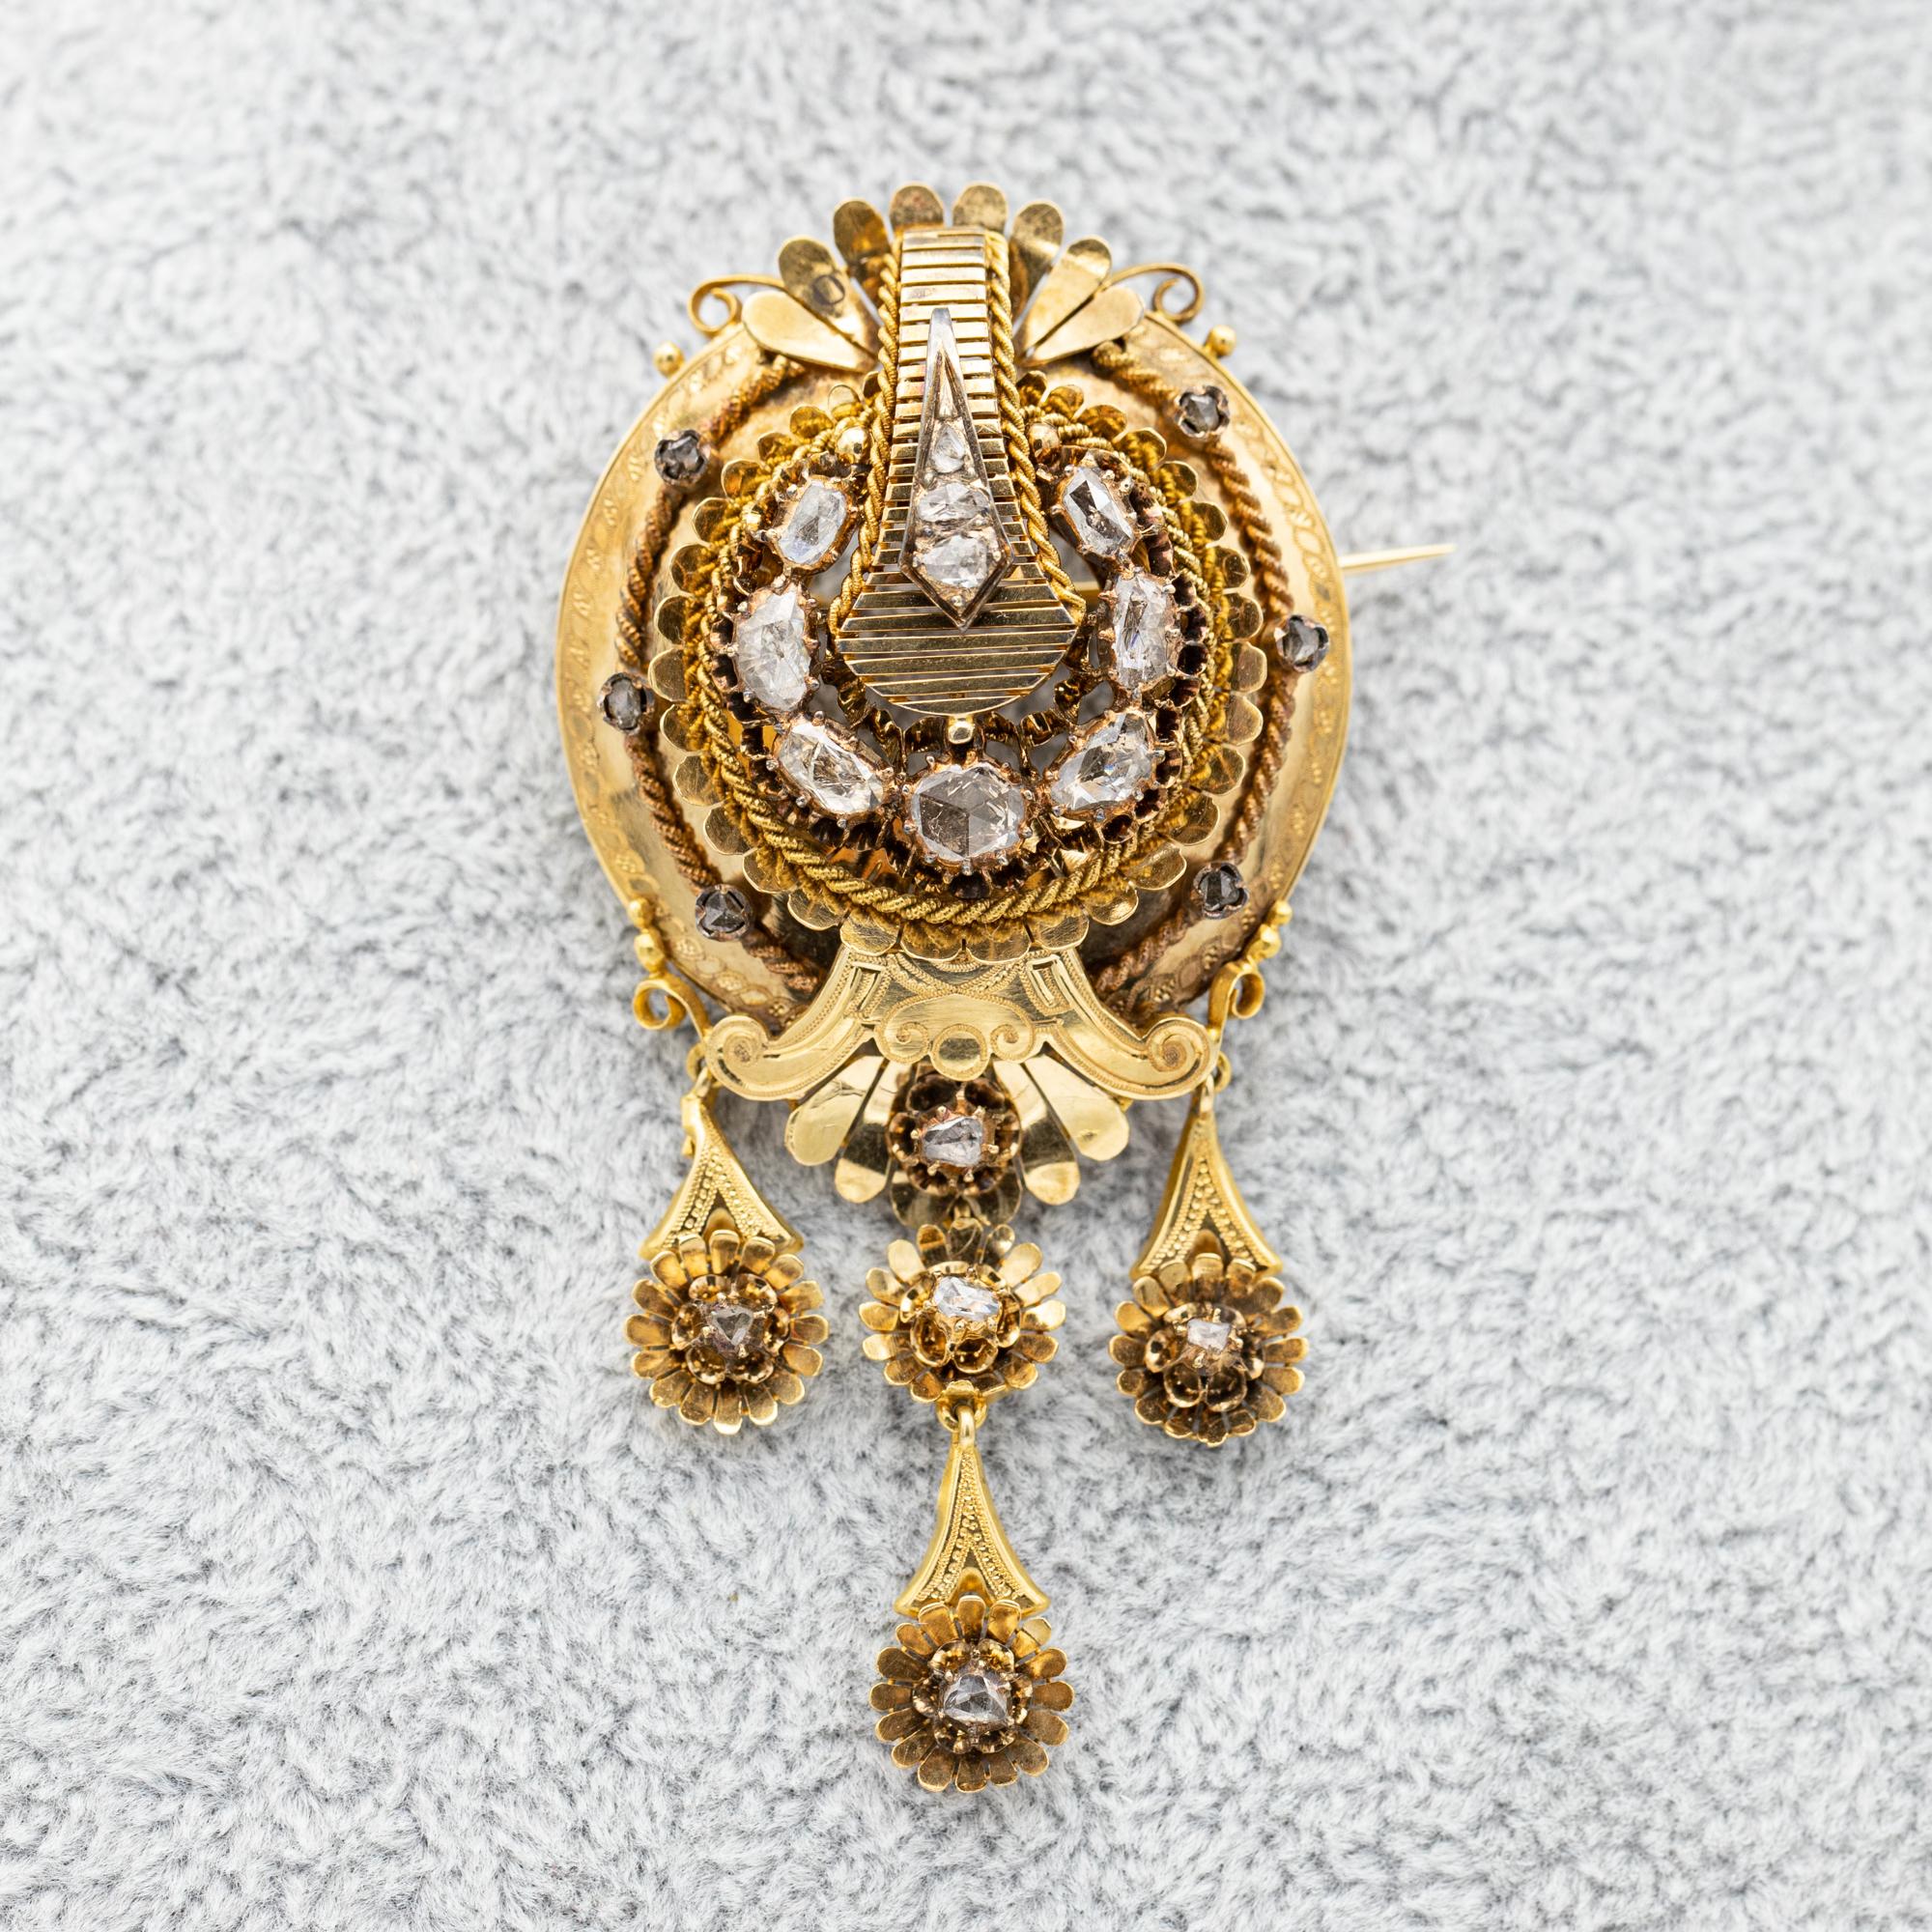 For sale is this stunning Victorian brooch. This royal diamond brooch was most likely made in Belgium or France in the middle of the 19th century. It is set with exceptionally large rose cut diamonds. These stunning diamonds are in very good